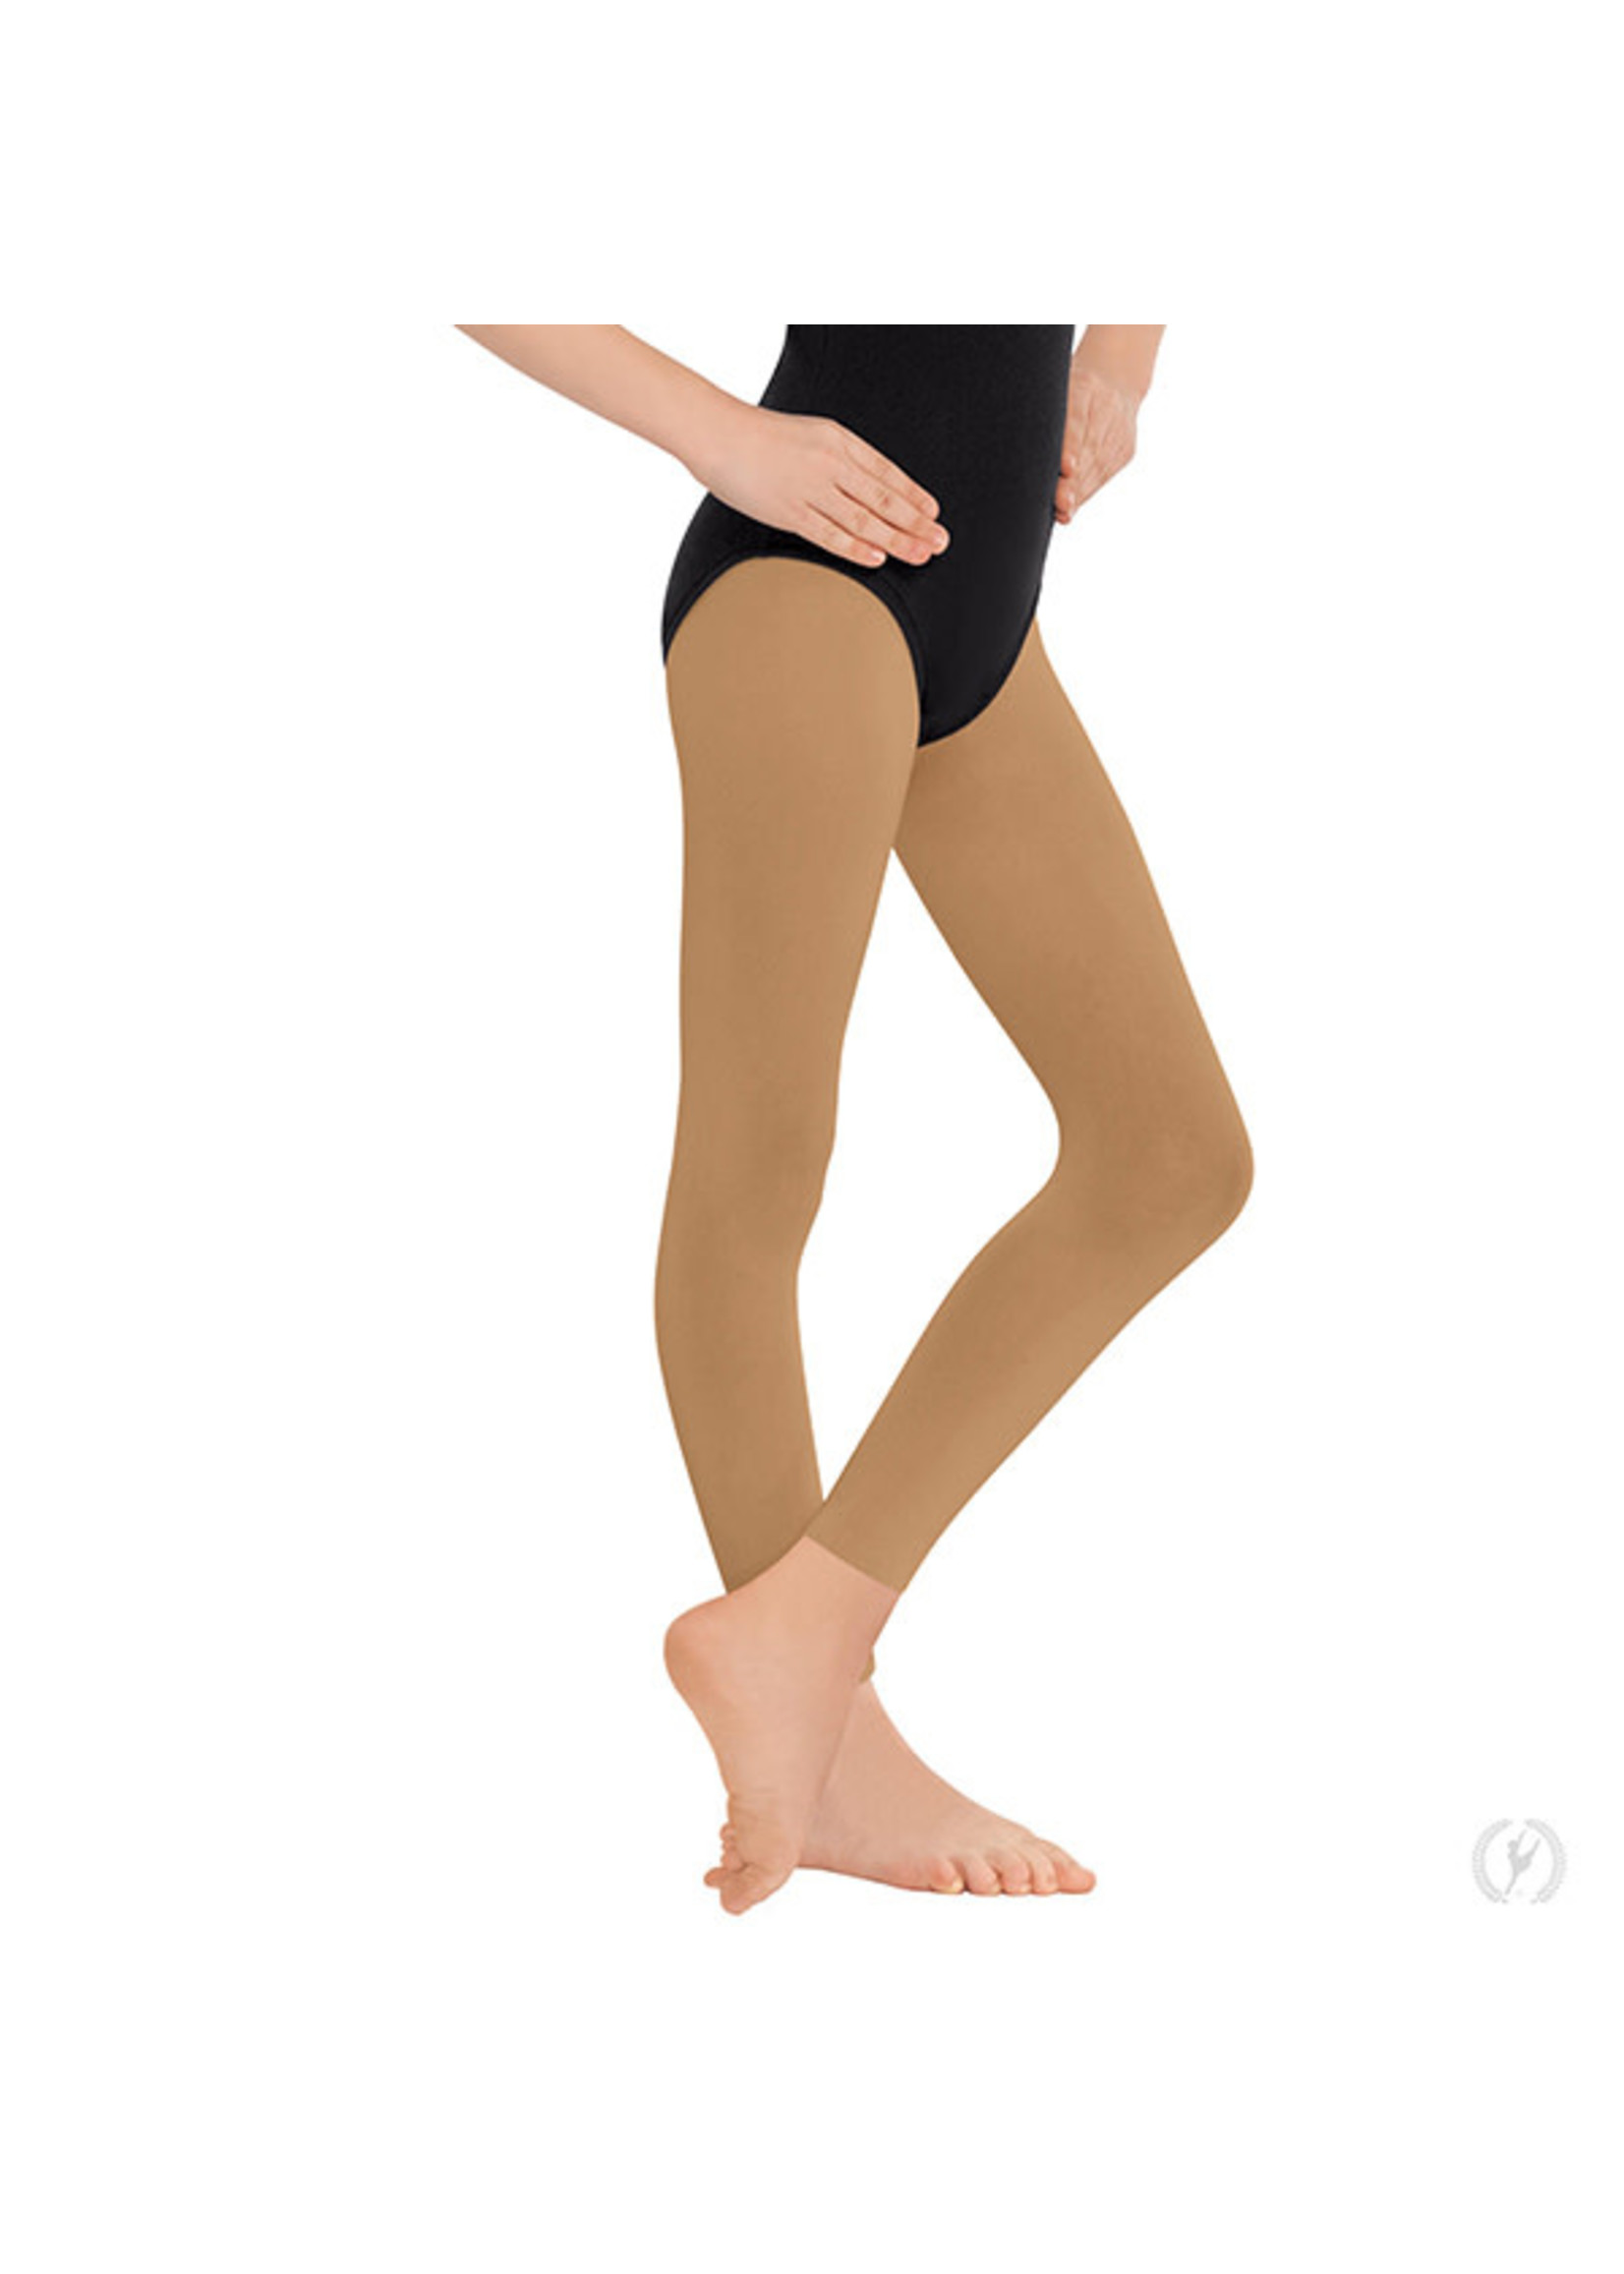 LADIES ADULT SILKY FOOTLESS DANCE TIGHTS IN BLACK - AVAILABLE IN S, M, L,  XL